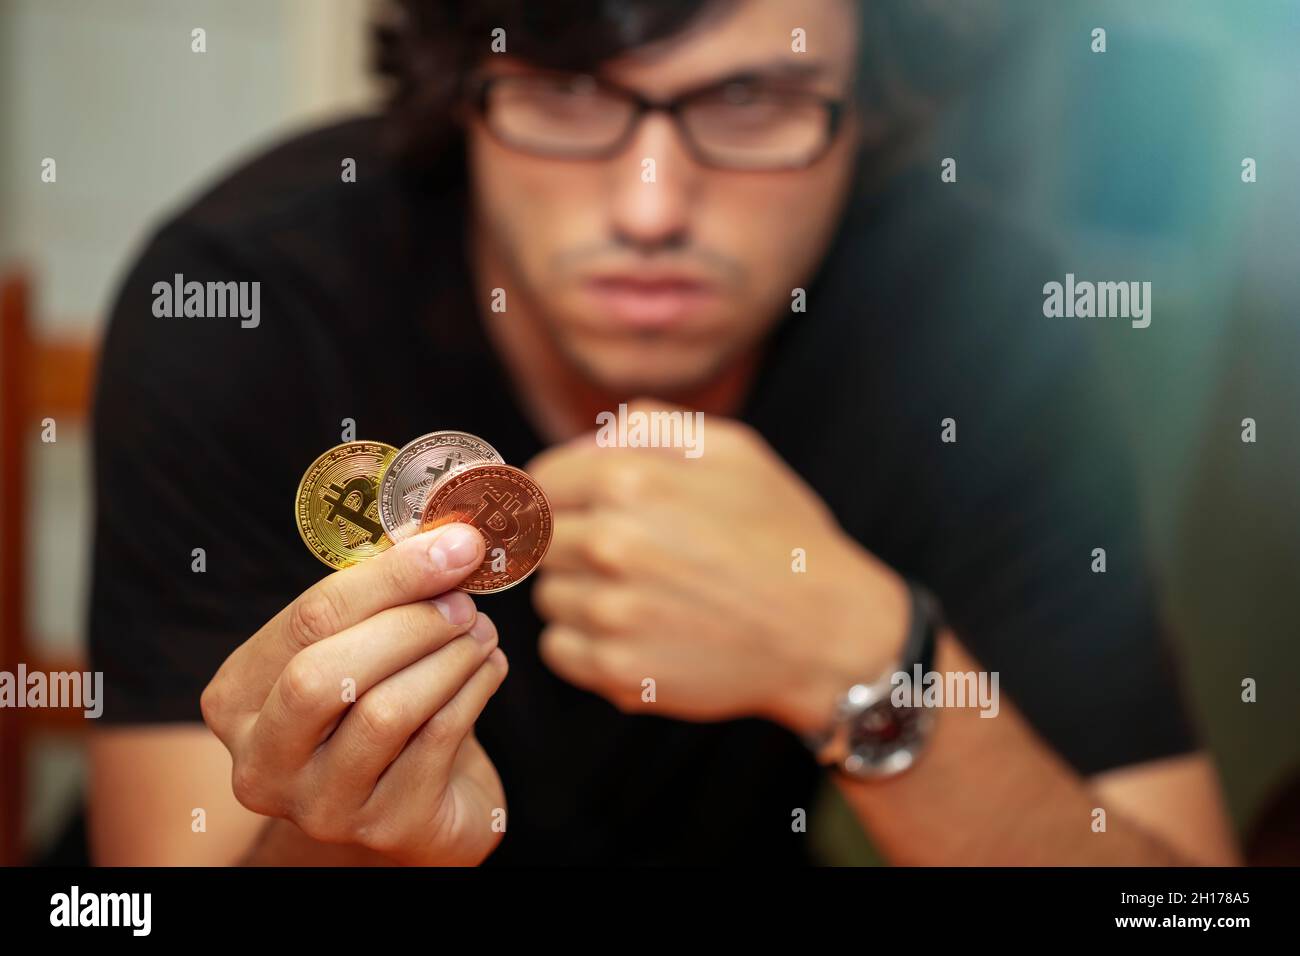 young man thinking to invest in bitcoin virtual currency Stock Photo